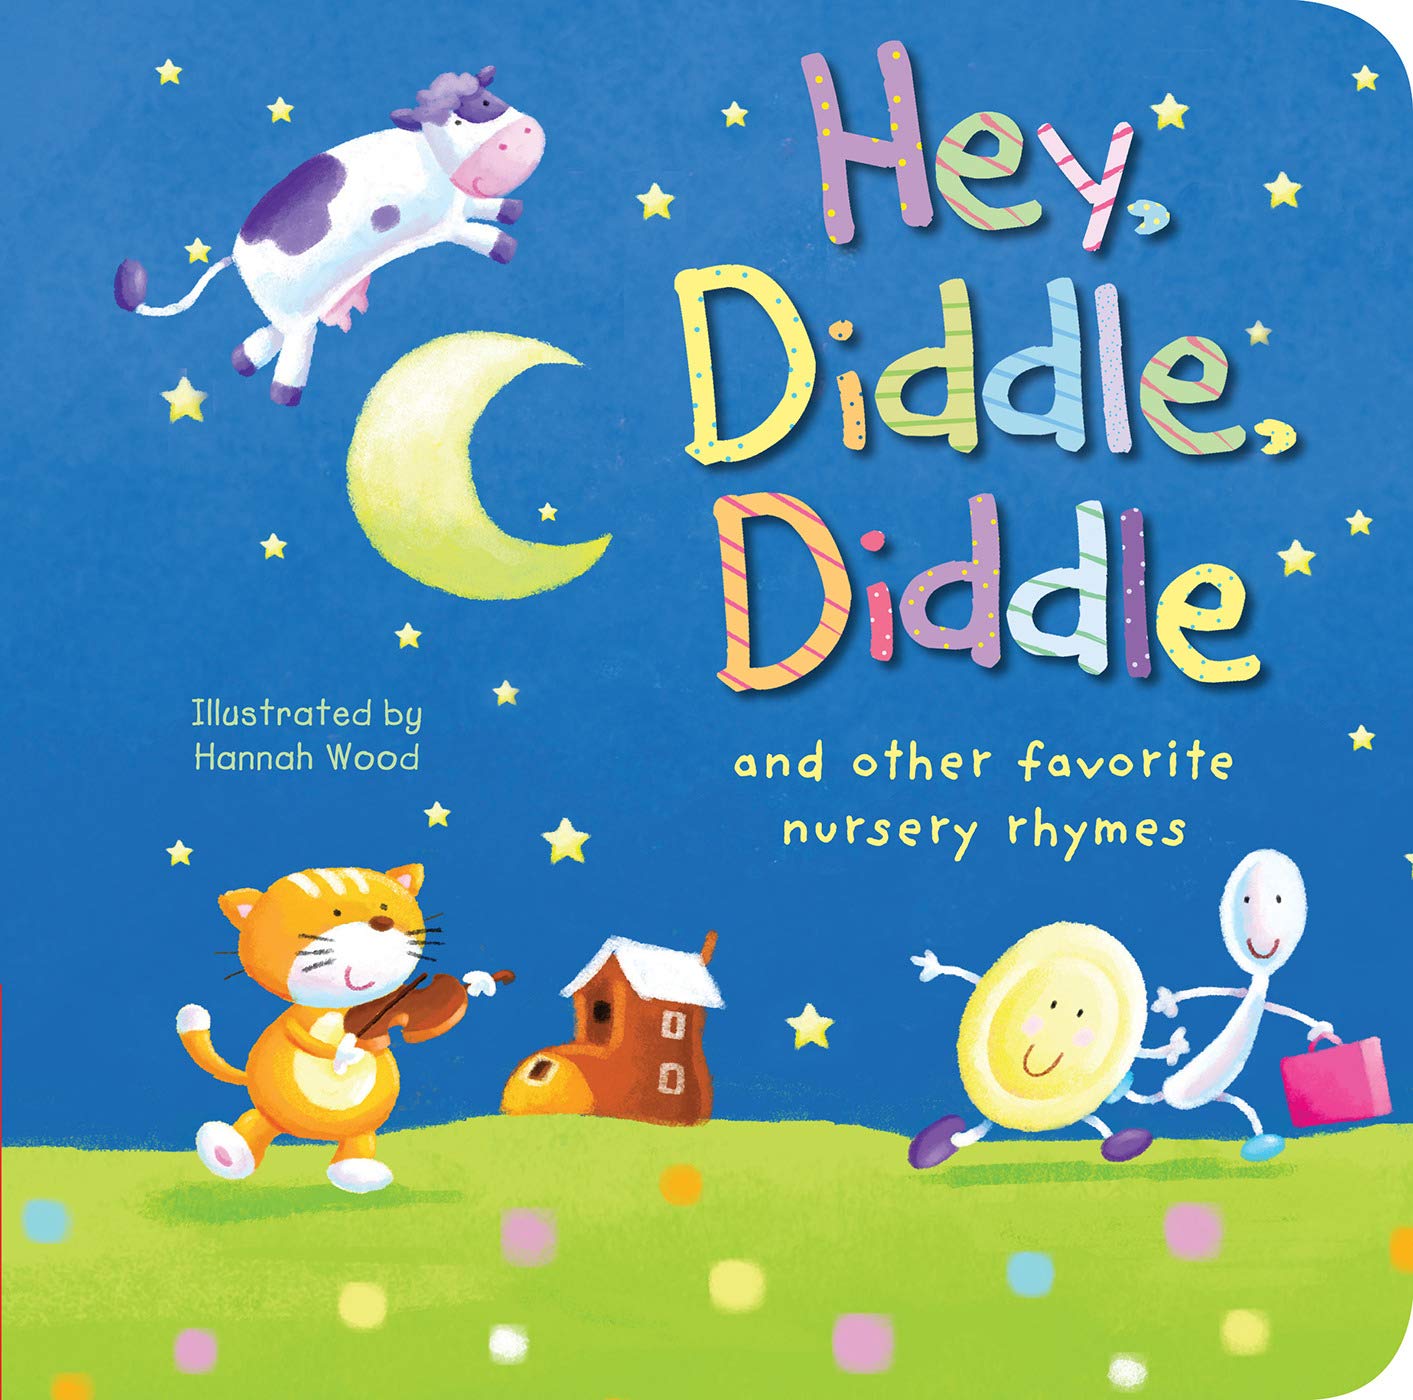 Buy Hey, Diddle, Diddle: and other favorite nursery rhymes Book Online at  Low Prices in India | Hey, Diddle, Diddle: and other favorite nursery  rhymes Reviews & Ratings - Amazon.in